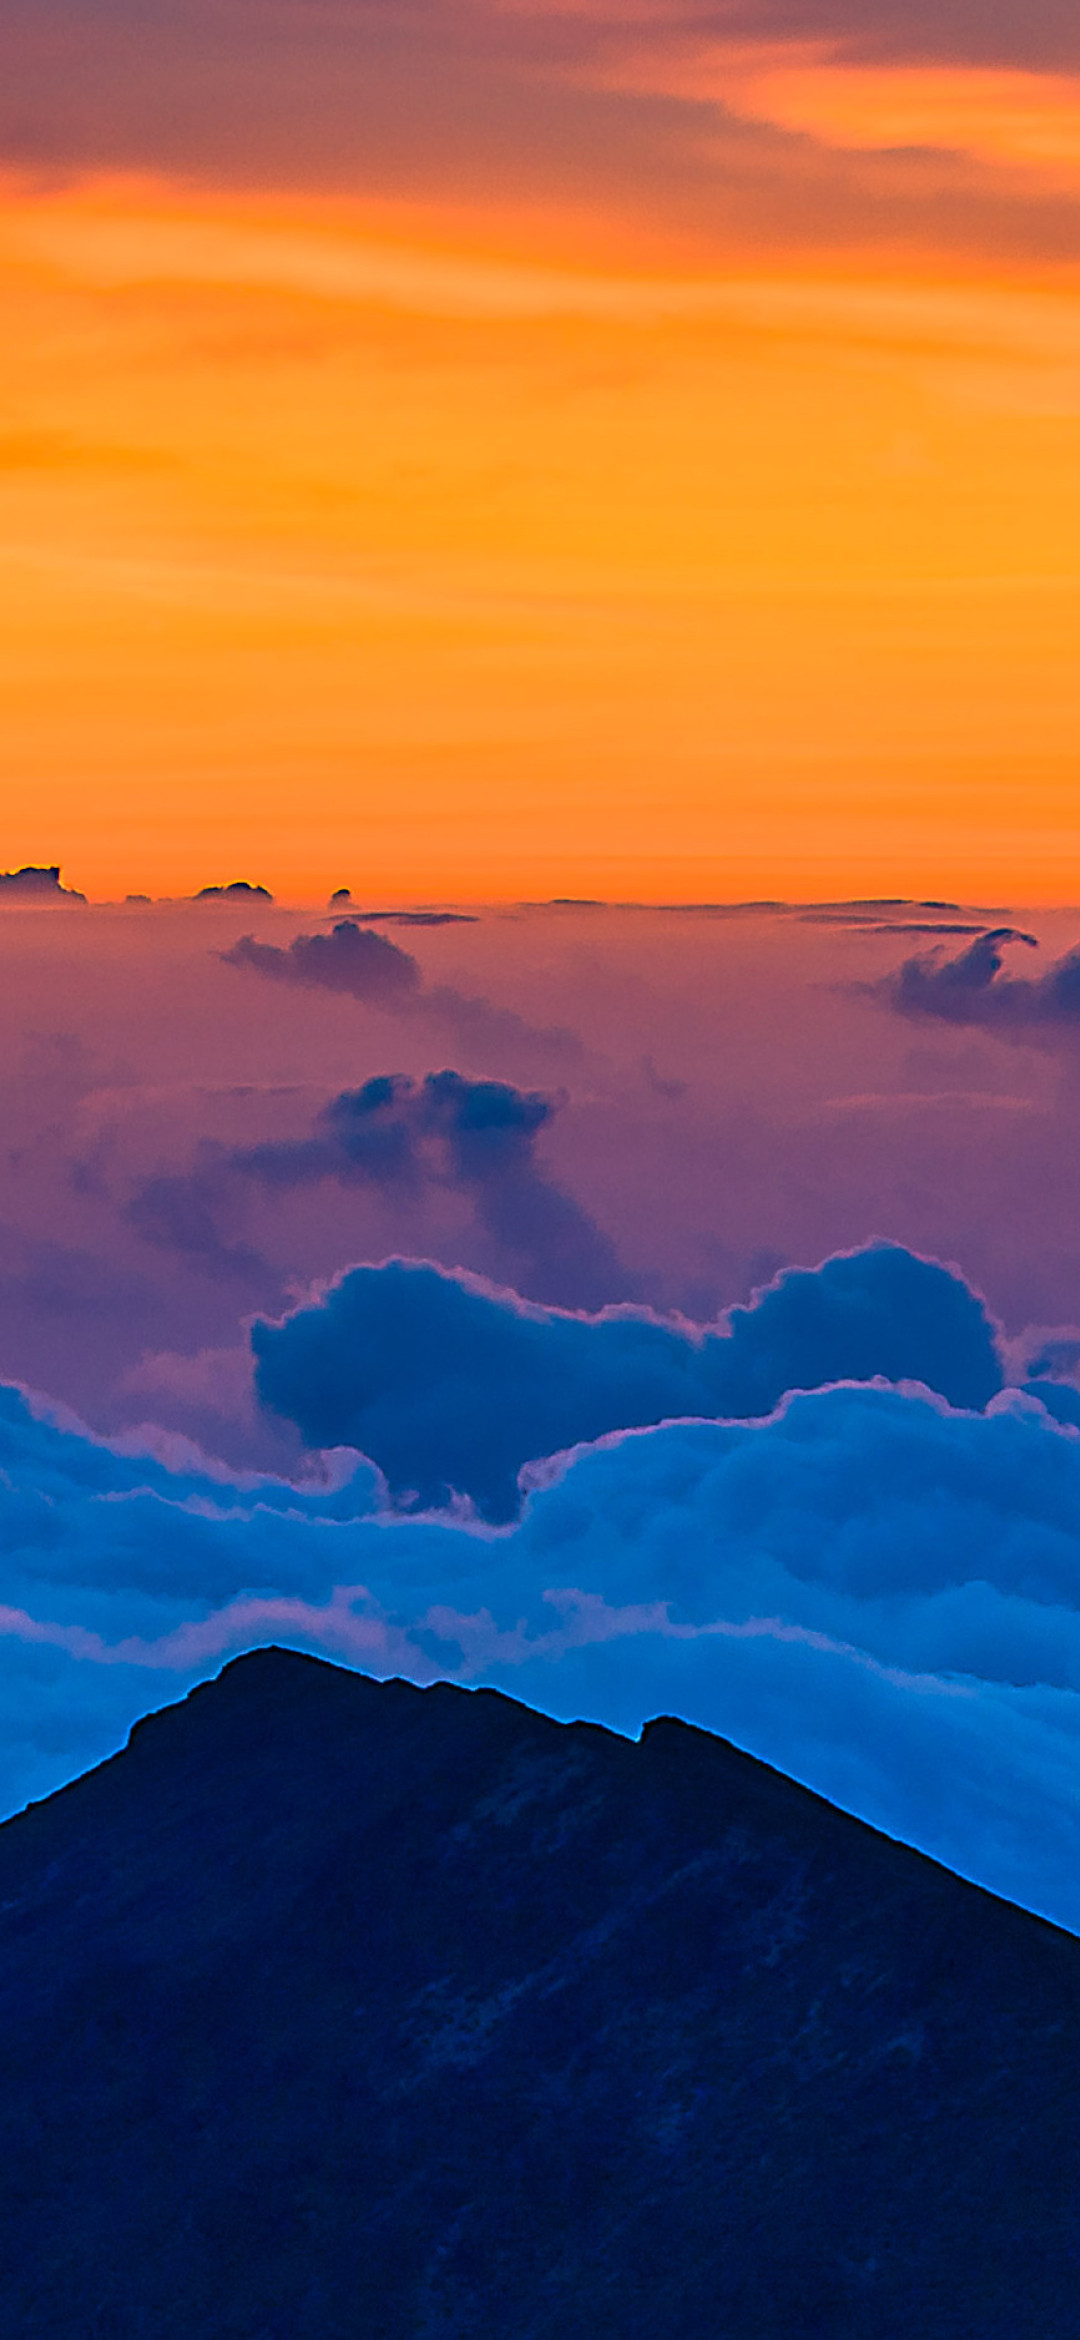 A mountain top with clouds and the sun setting - Hawaii, sunrise